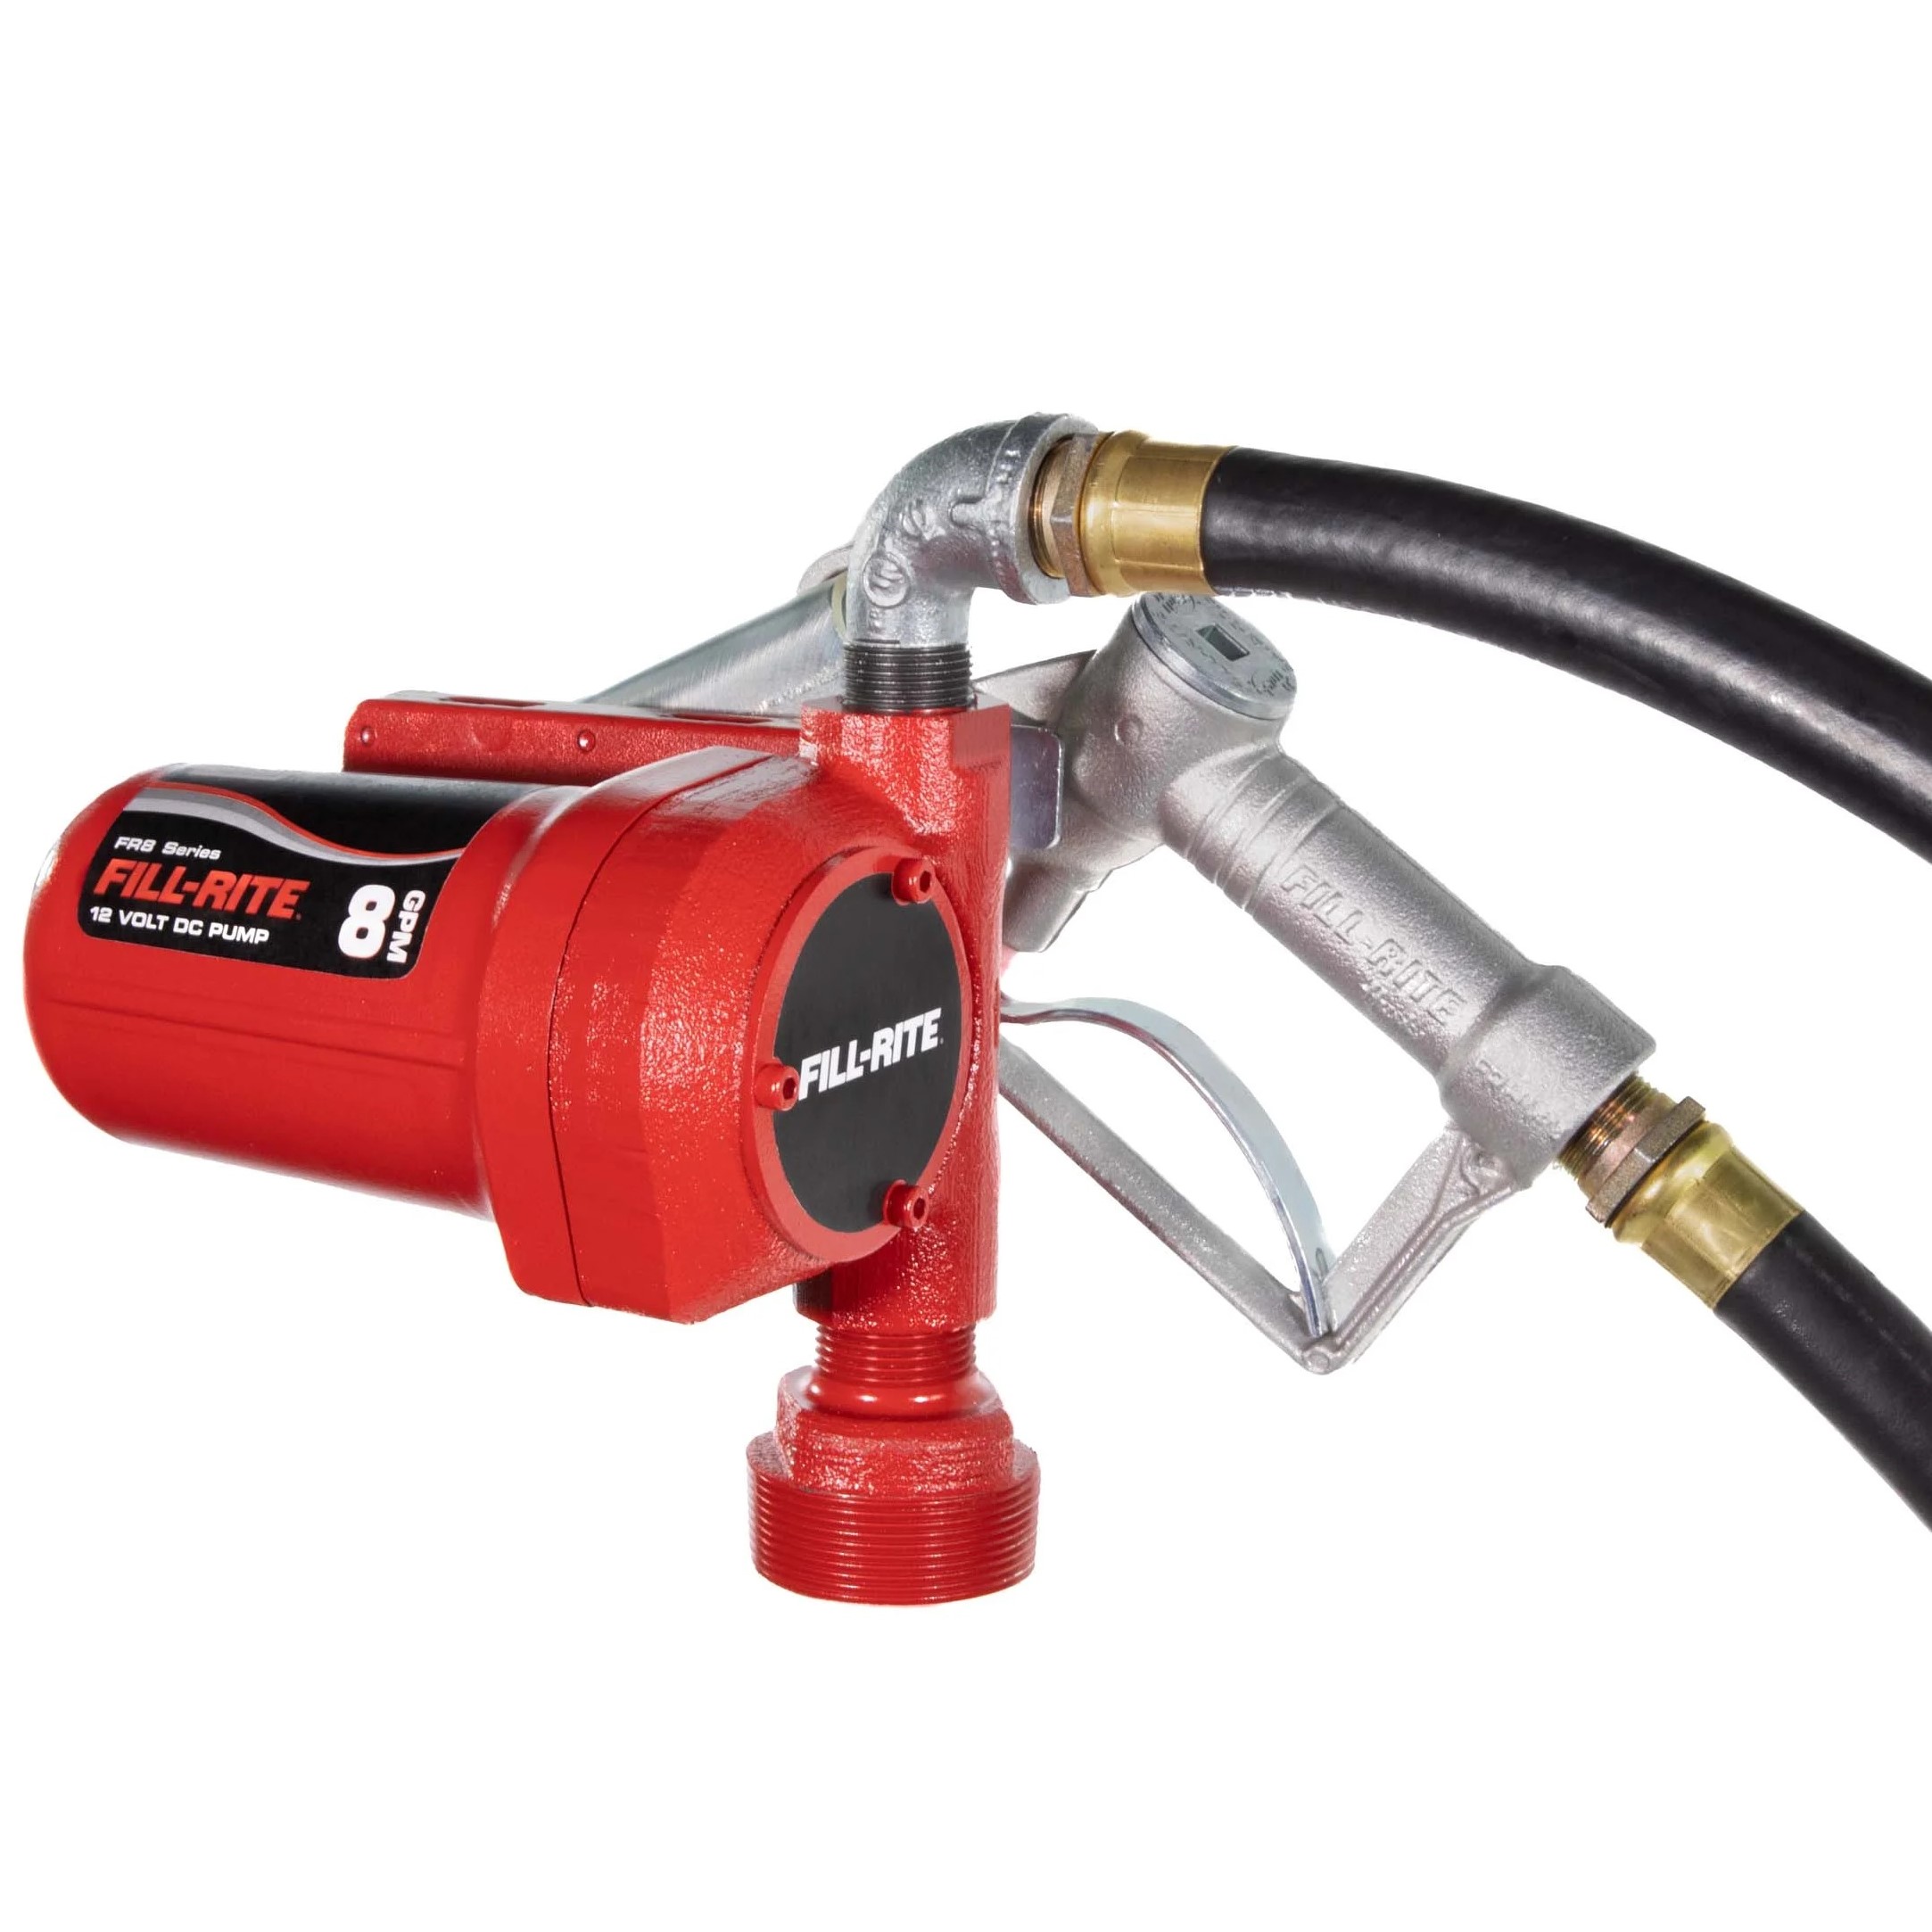 Picture of Fuel Pump, 8 GPM, 12 VDC, Manual Nozzle and 3/4" x 12' Hose, 1" Telescoping Suction Pipe